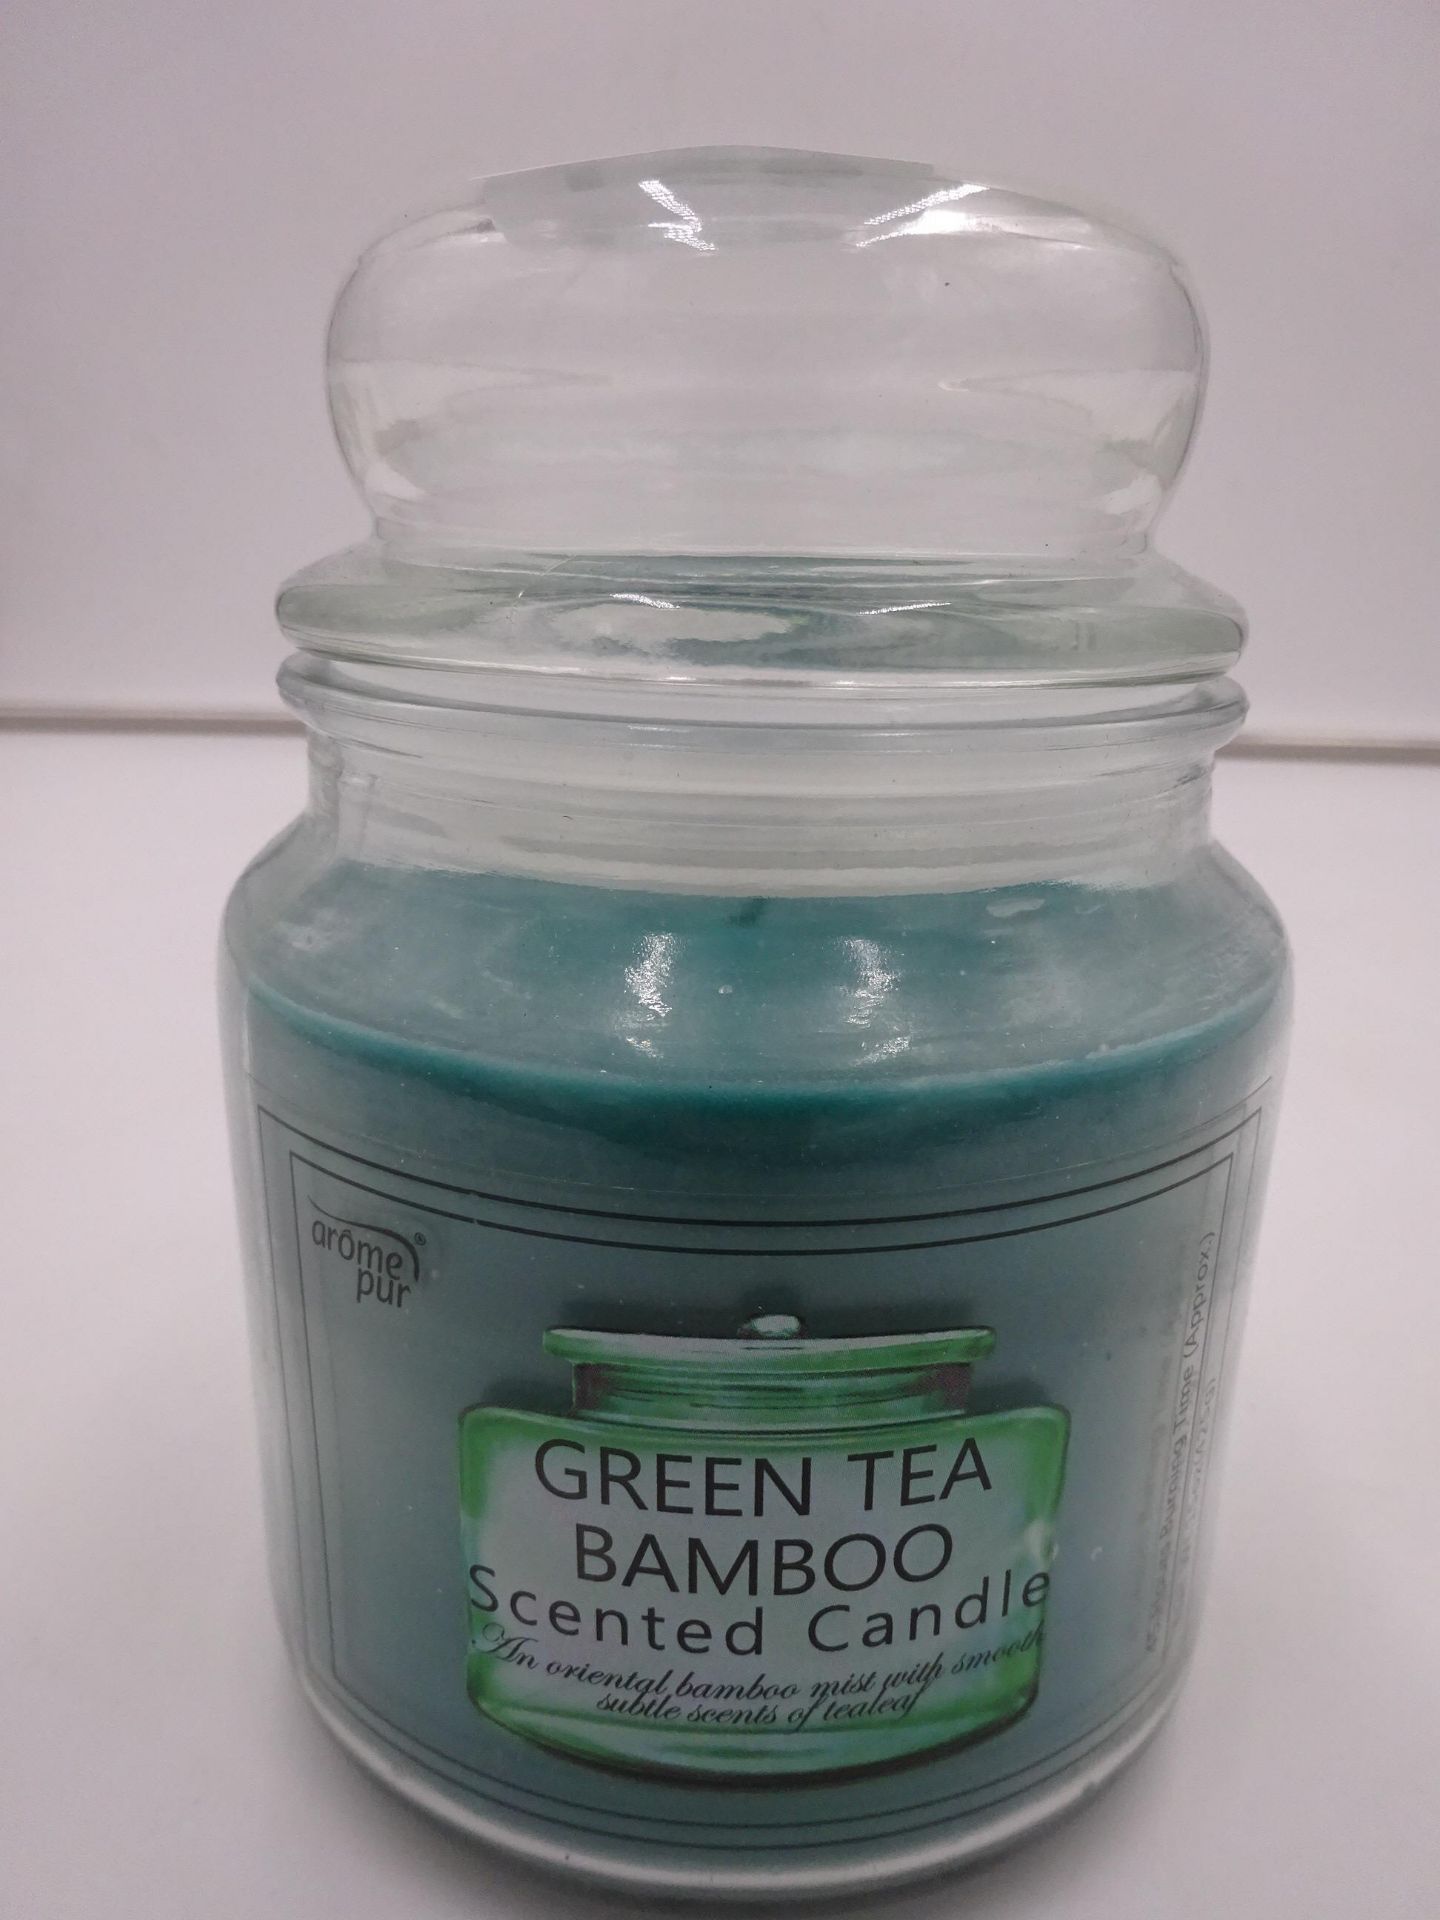 NEW GREEN TEA BAMBOO SCENTED CANDLE WITH 45 HOURS BURNING TIME